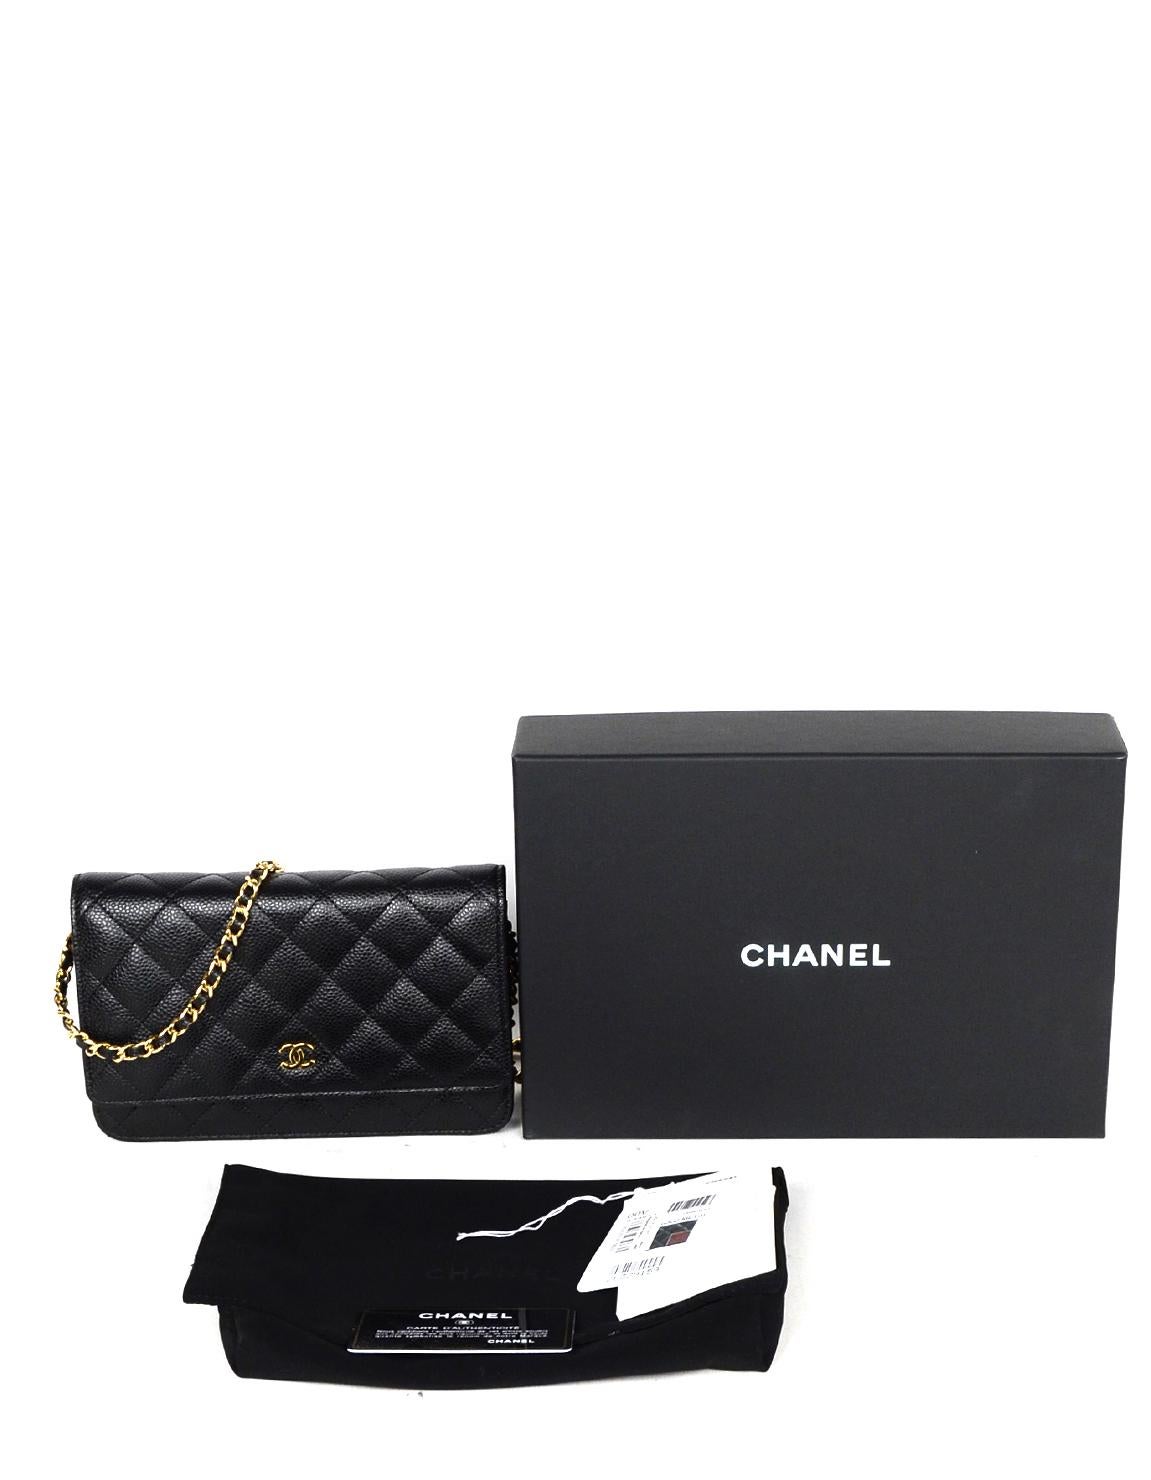 Chanel Black Caviar Leather Quilted Wallet On Chain WOC Crossbody Bag w/ Receipt 3